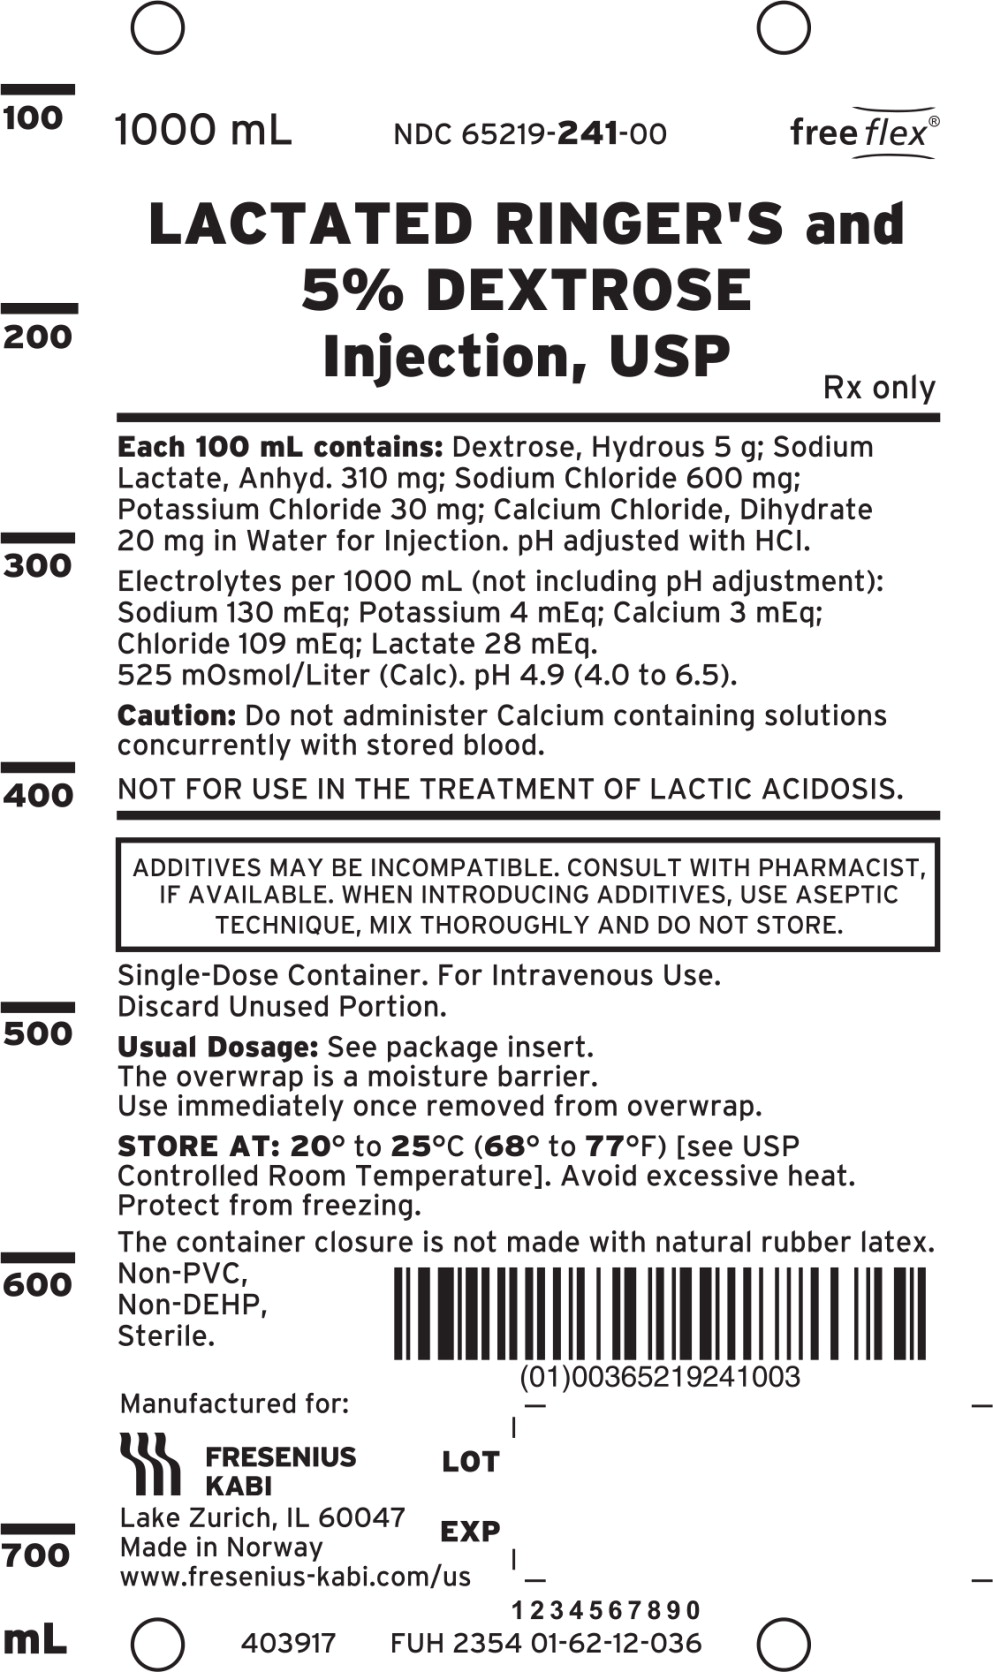 PACKAGE LABEL - PRINCIPAL DISPLAY –Lactated Ringer's and 5% Dextrose Bag Label
